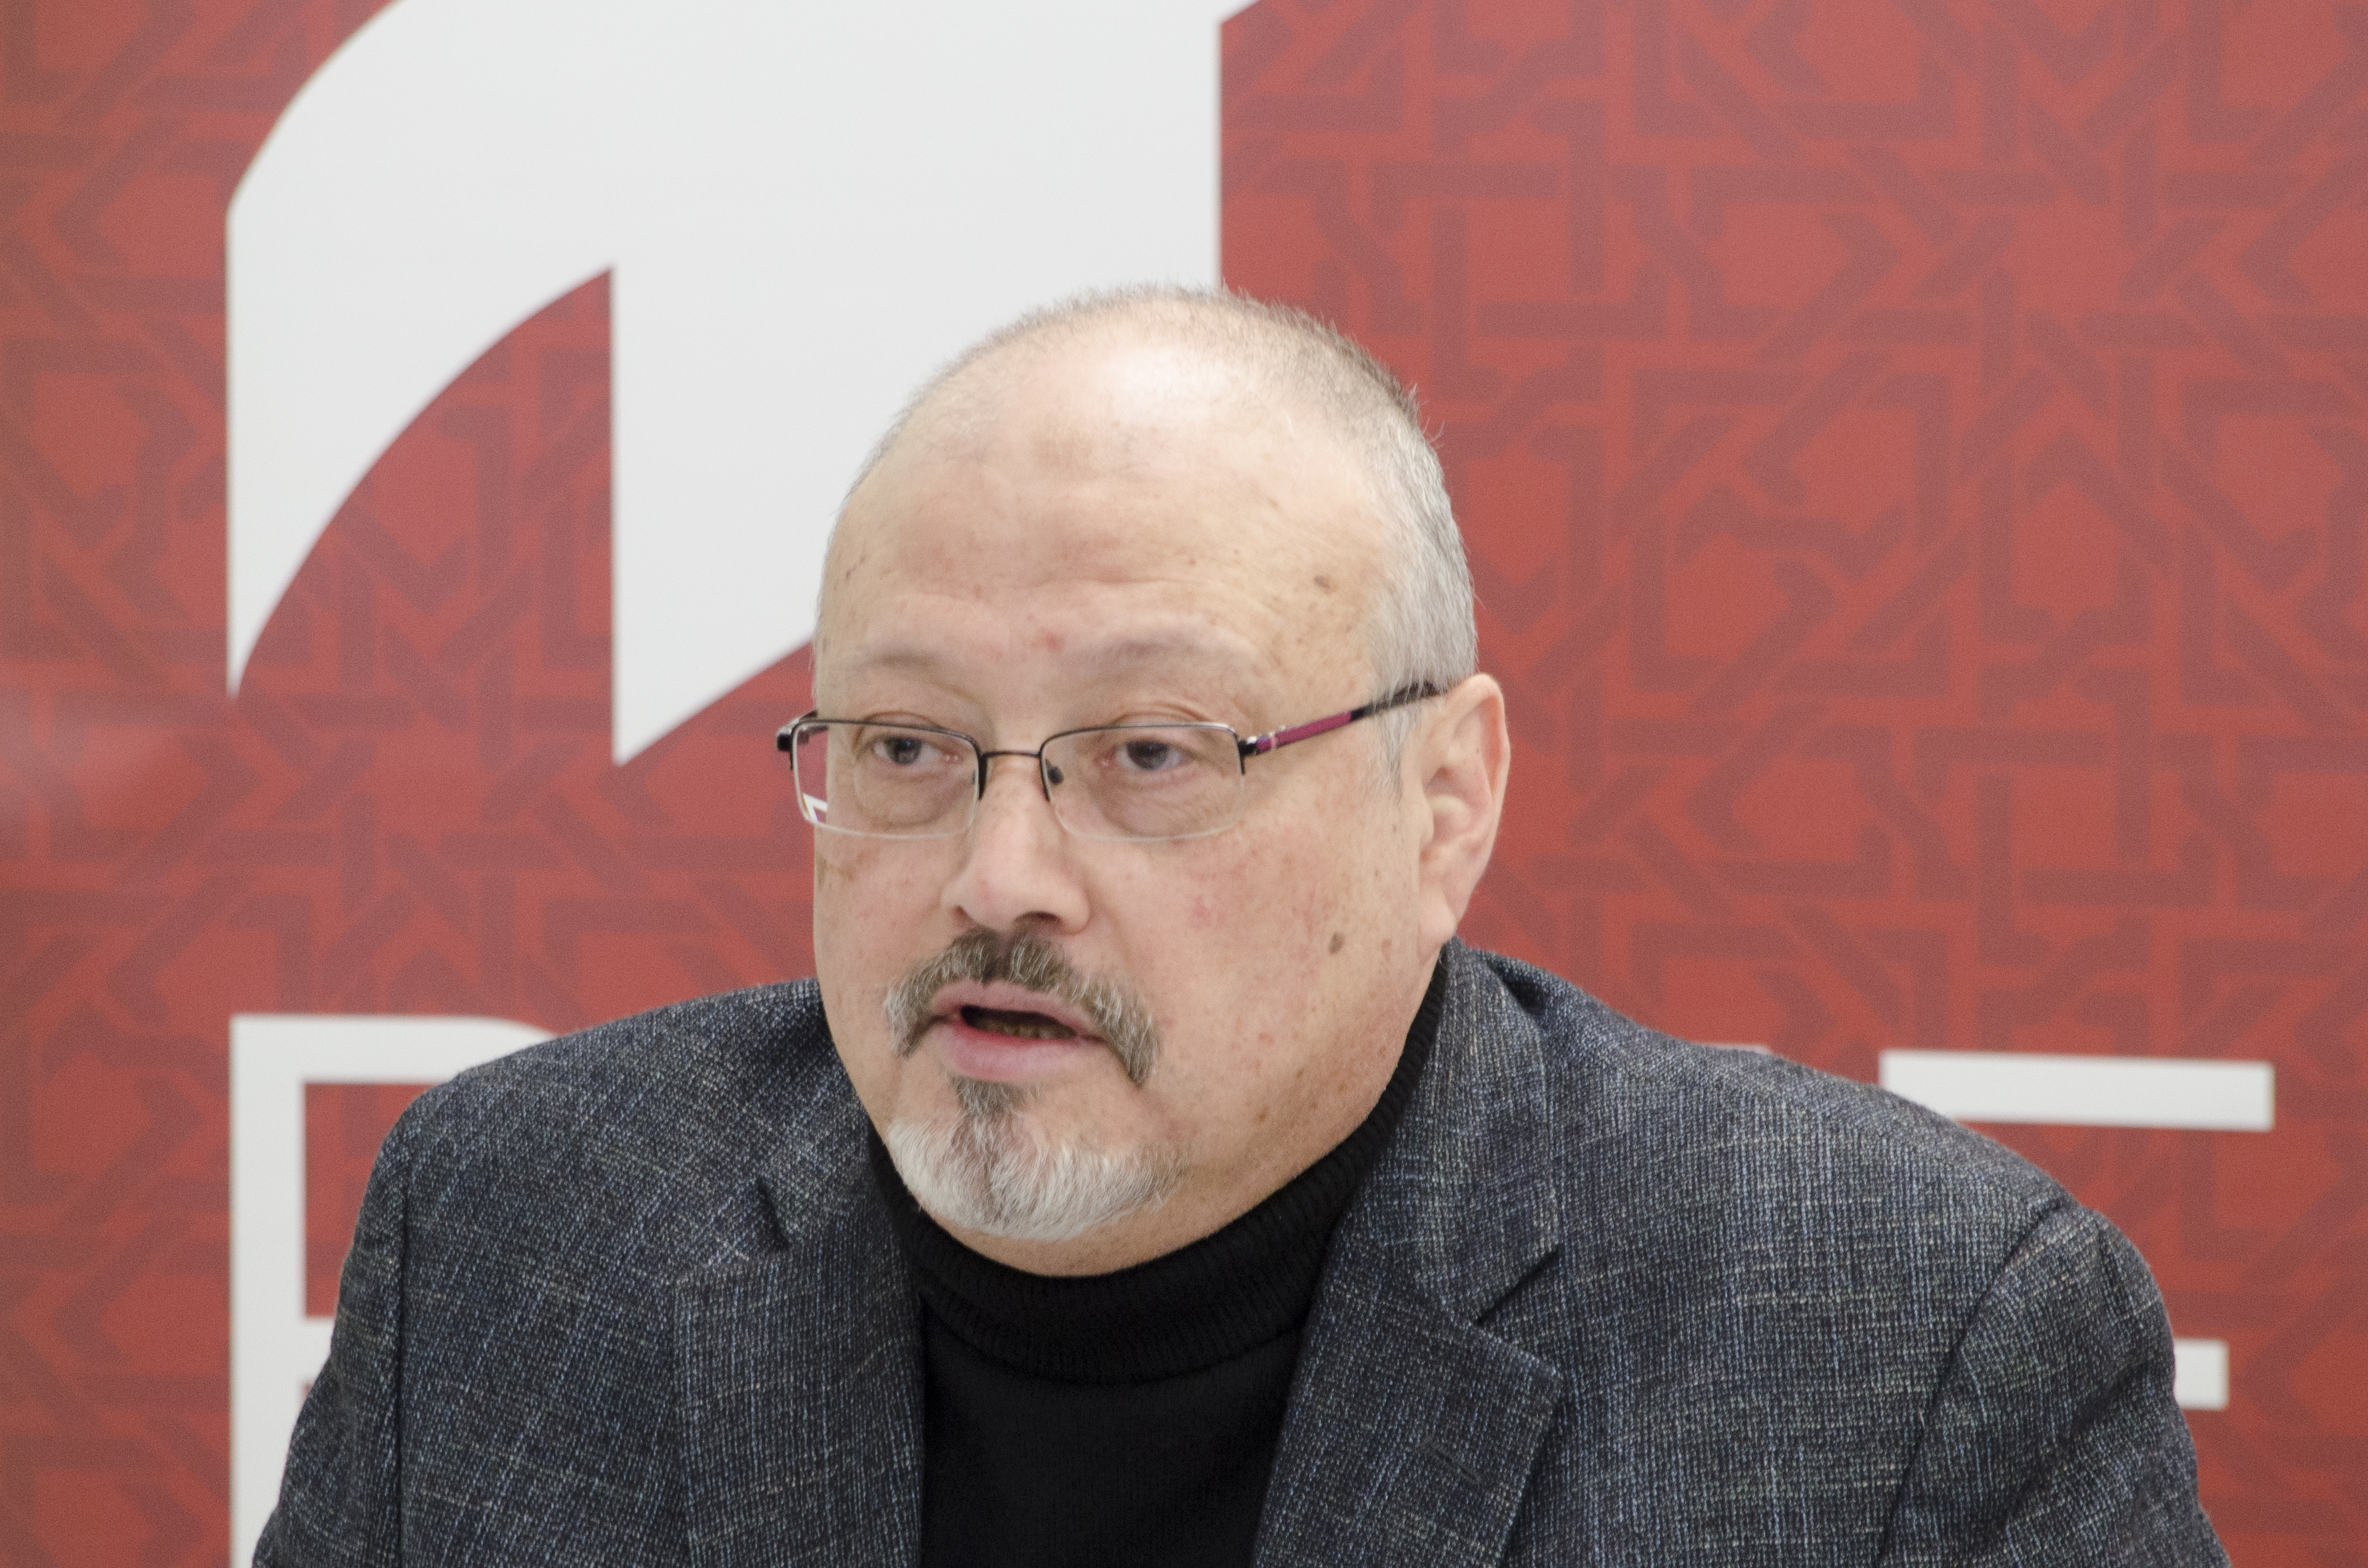 US appeals court rules federal agencies not required to disclose existence of Khashoggi documents